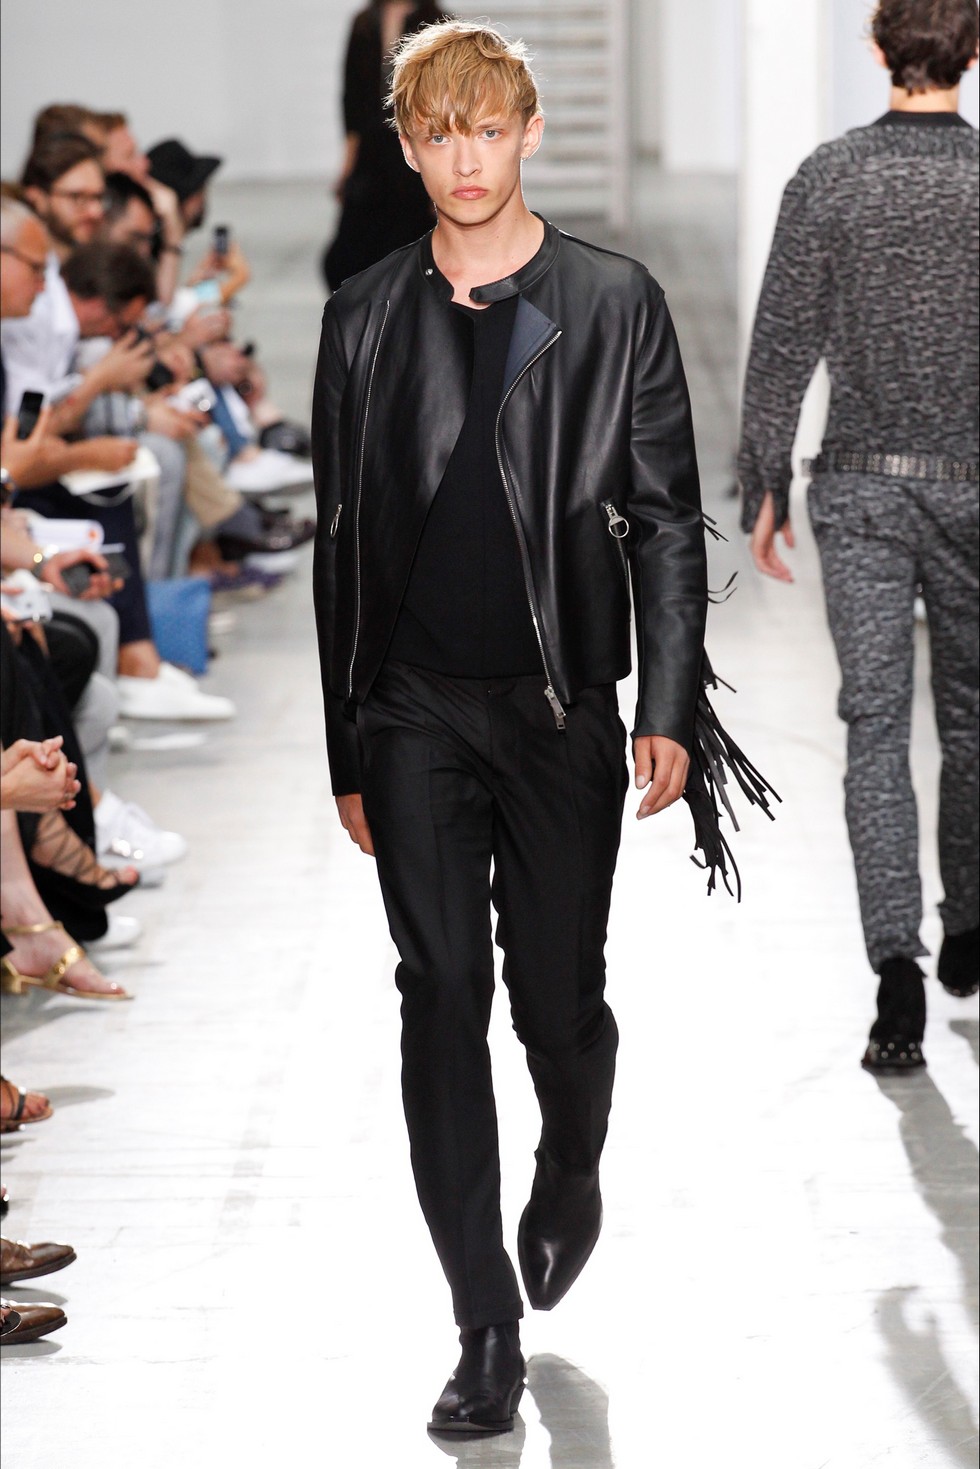 Milan menswear spring summer 2016 fashion week - Day one highlights-Costume-National-Menswear-Collection